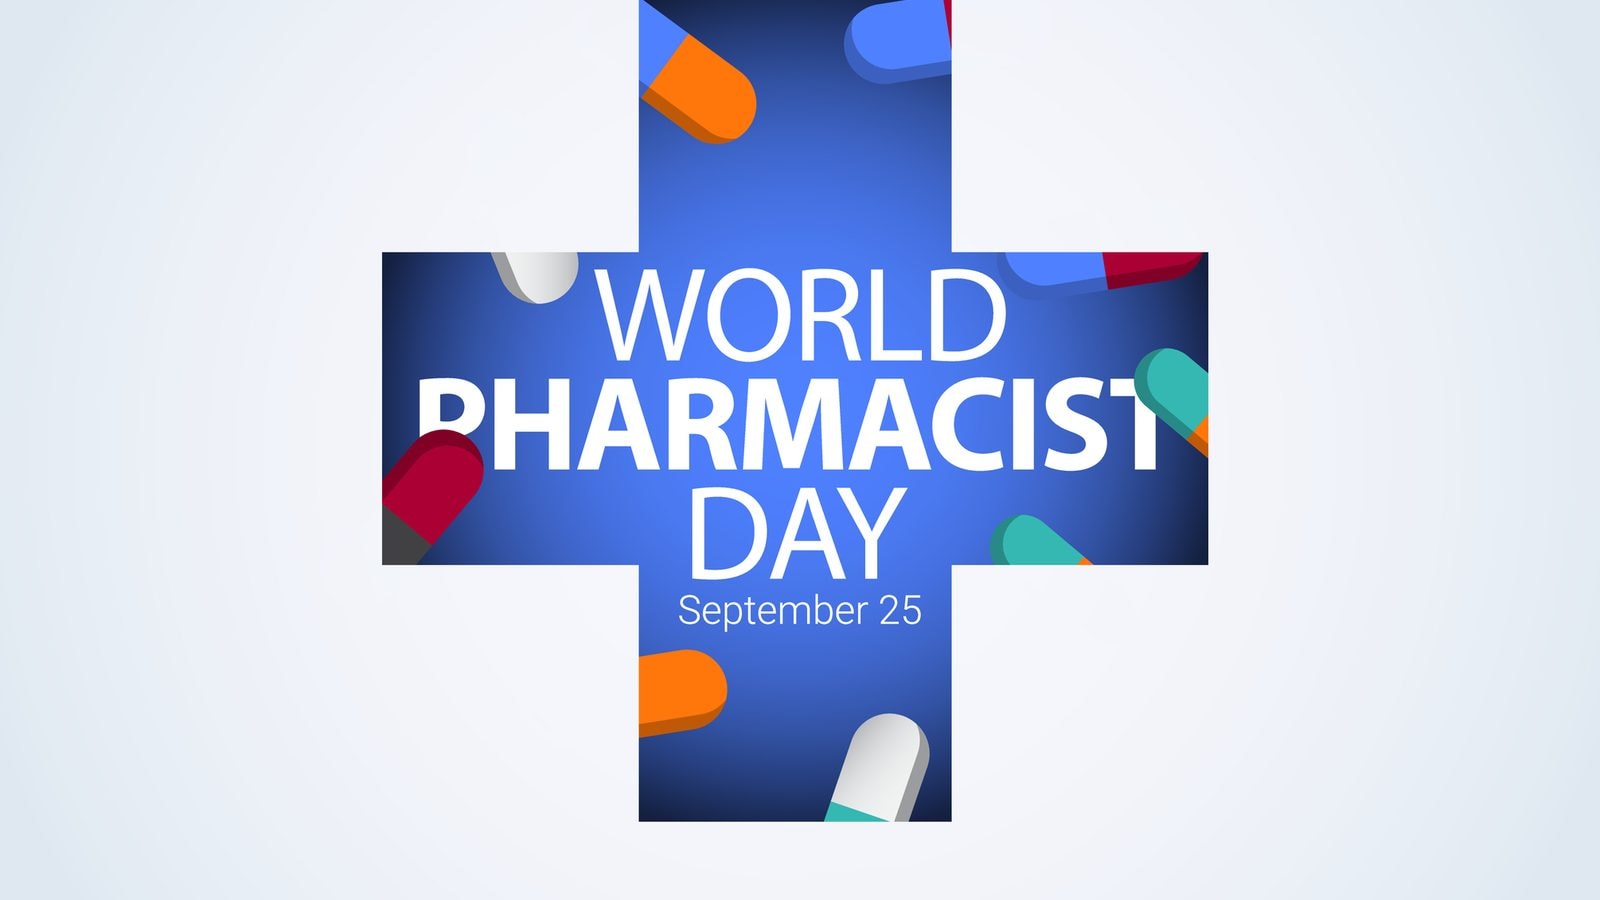 World Pharmacists Day 2021: Theme, History and Significance